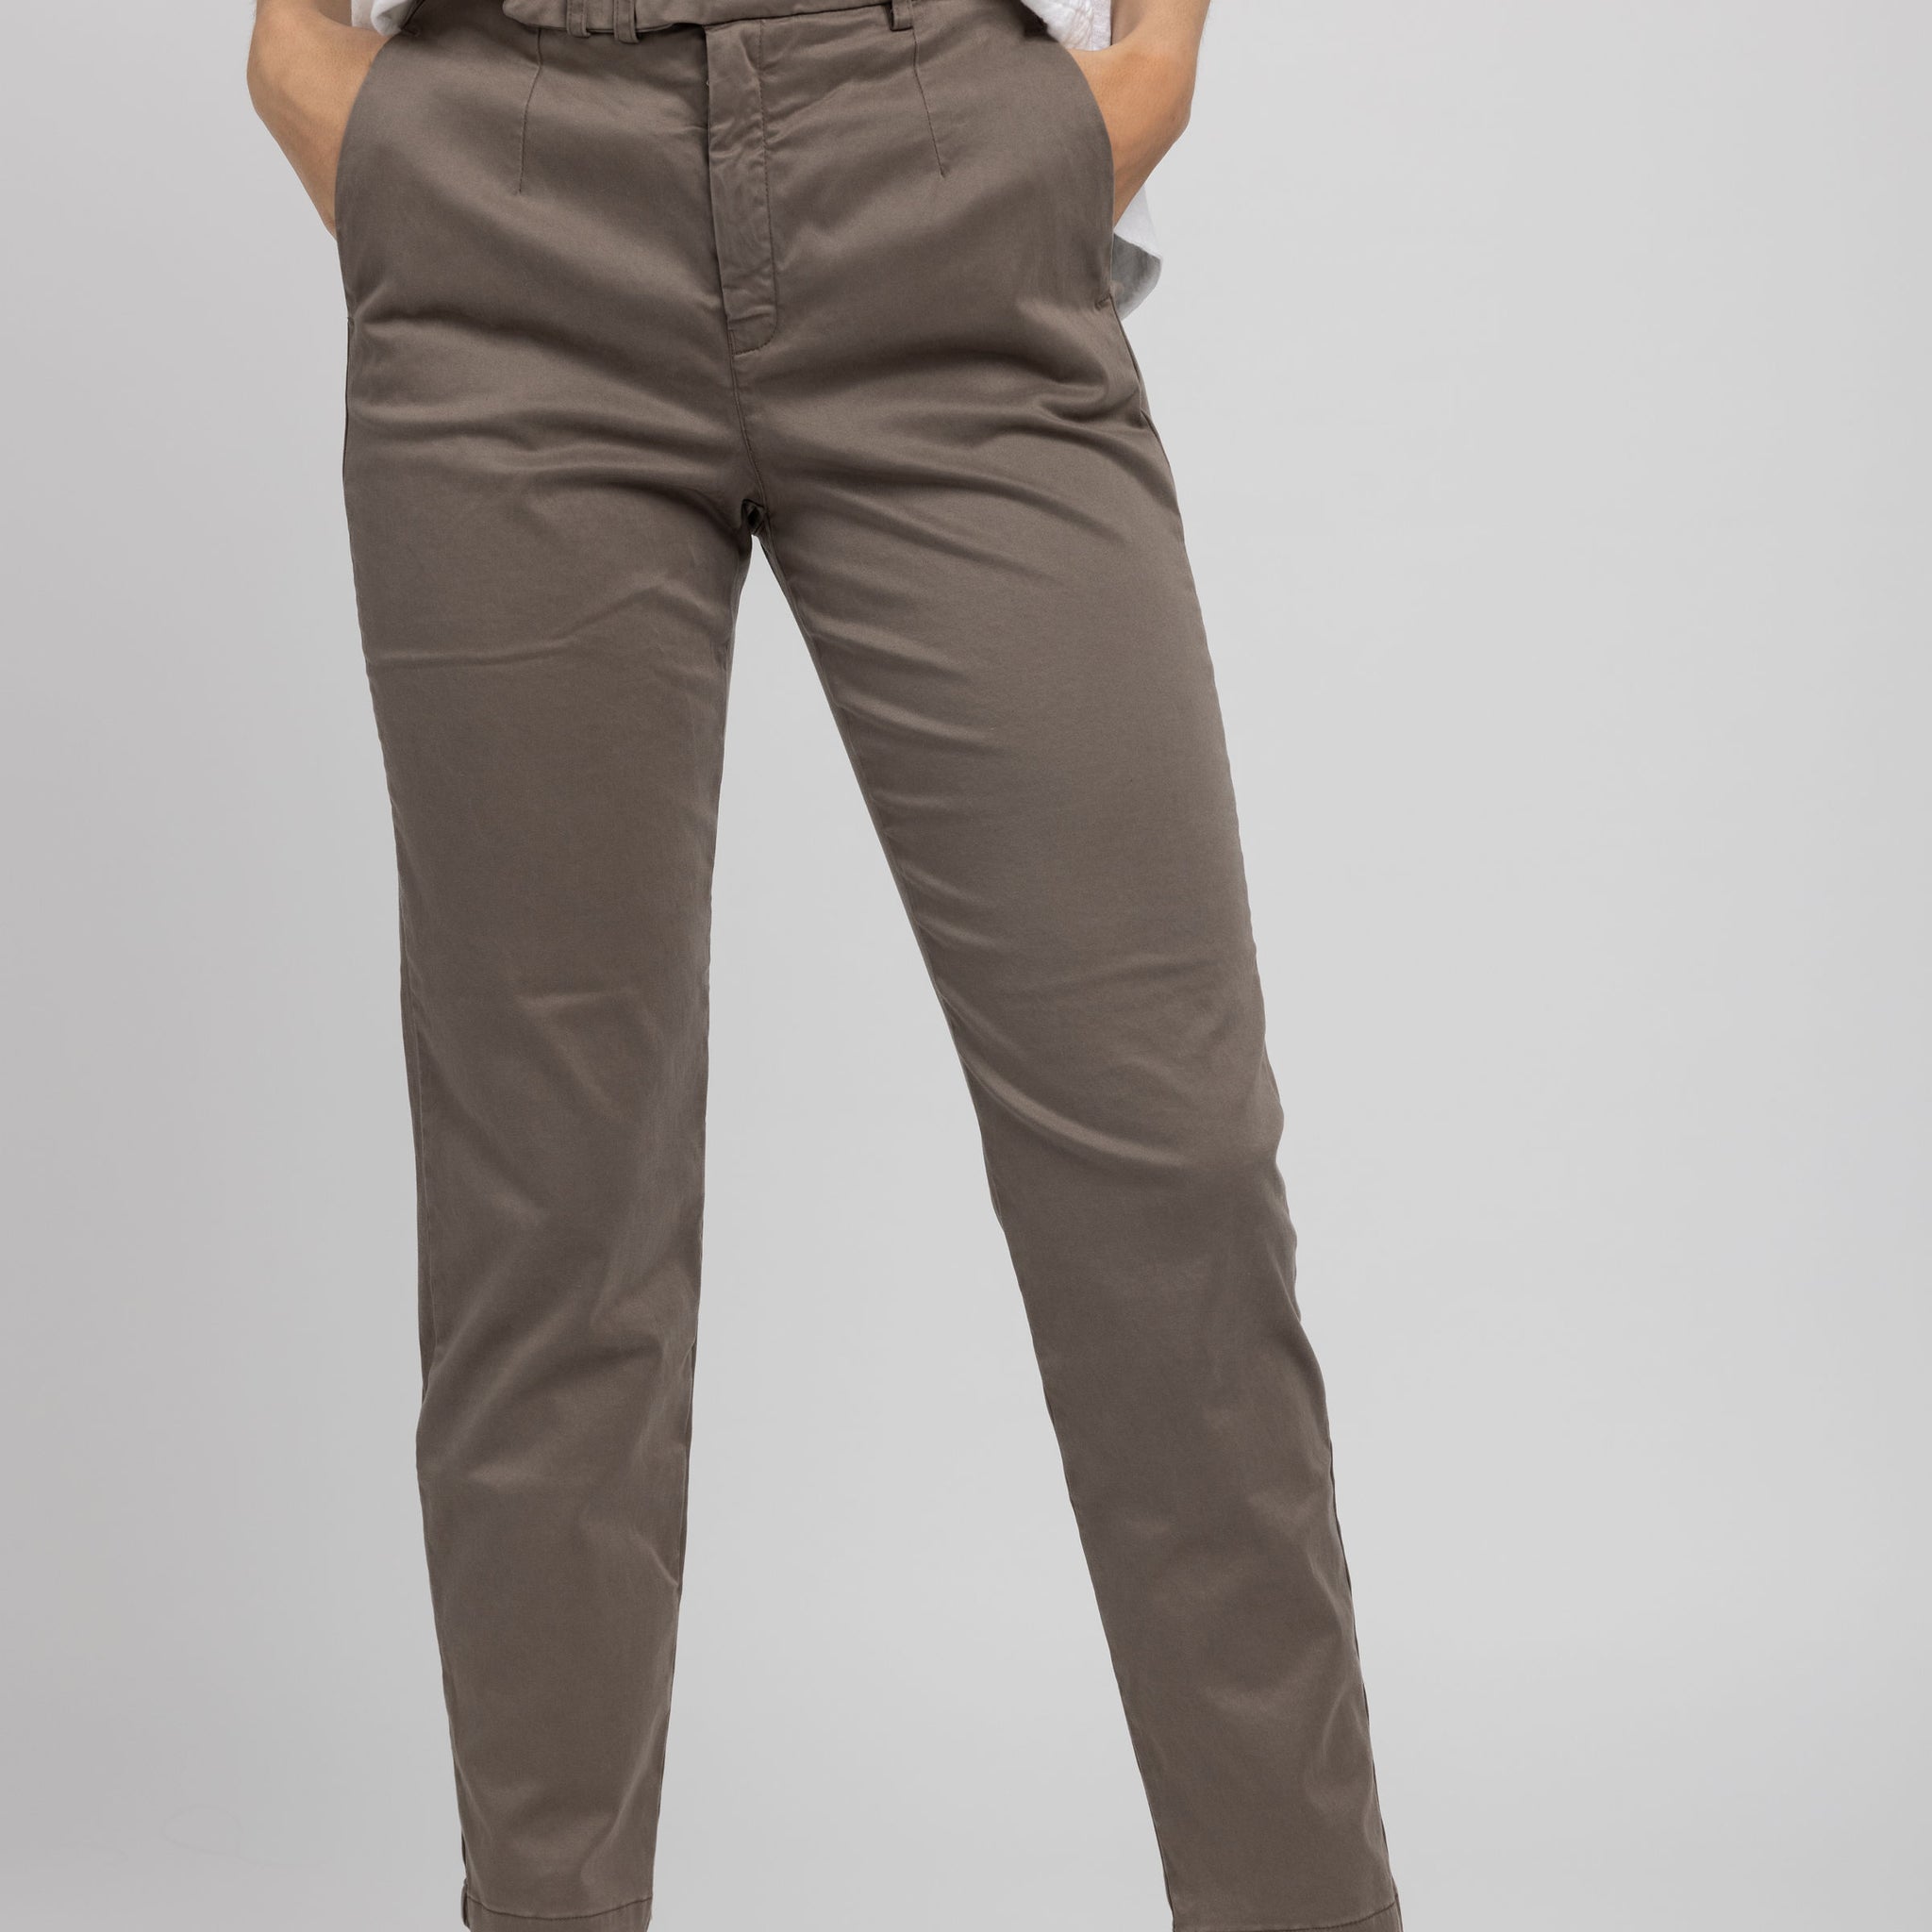 TANDEM Trouser Pants in Taupe